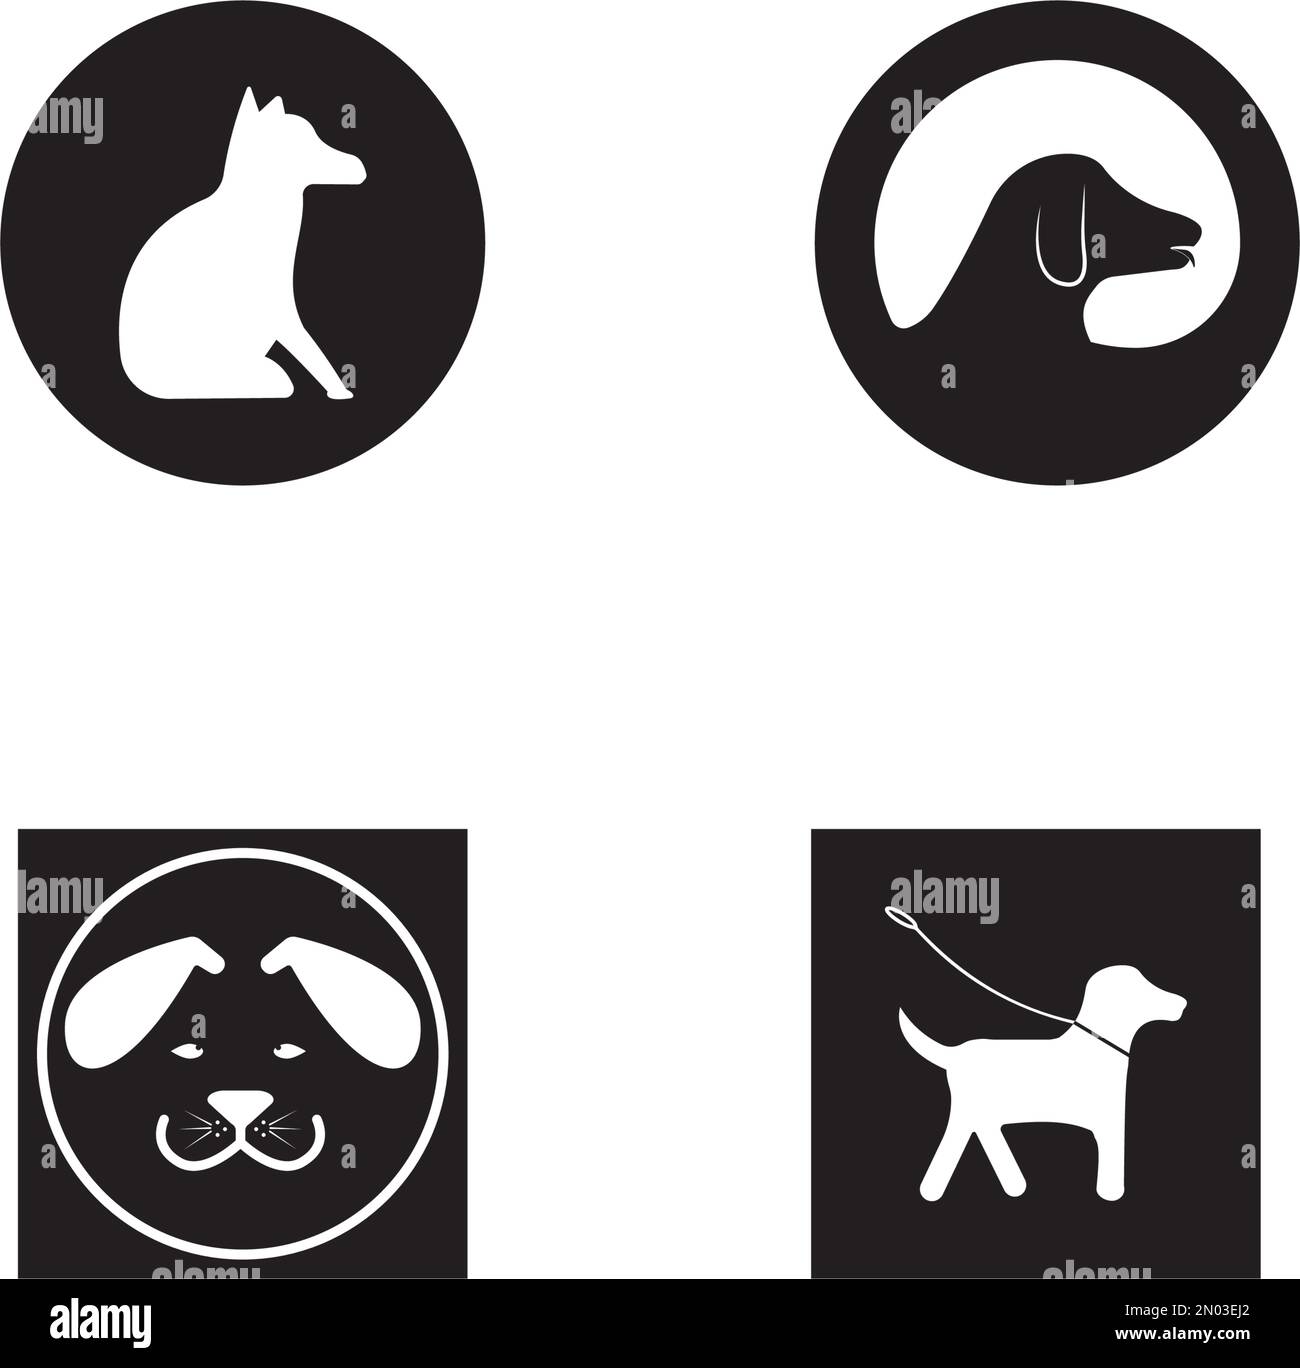 Dog icon vector design illustration and background Stock Vector